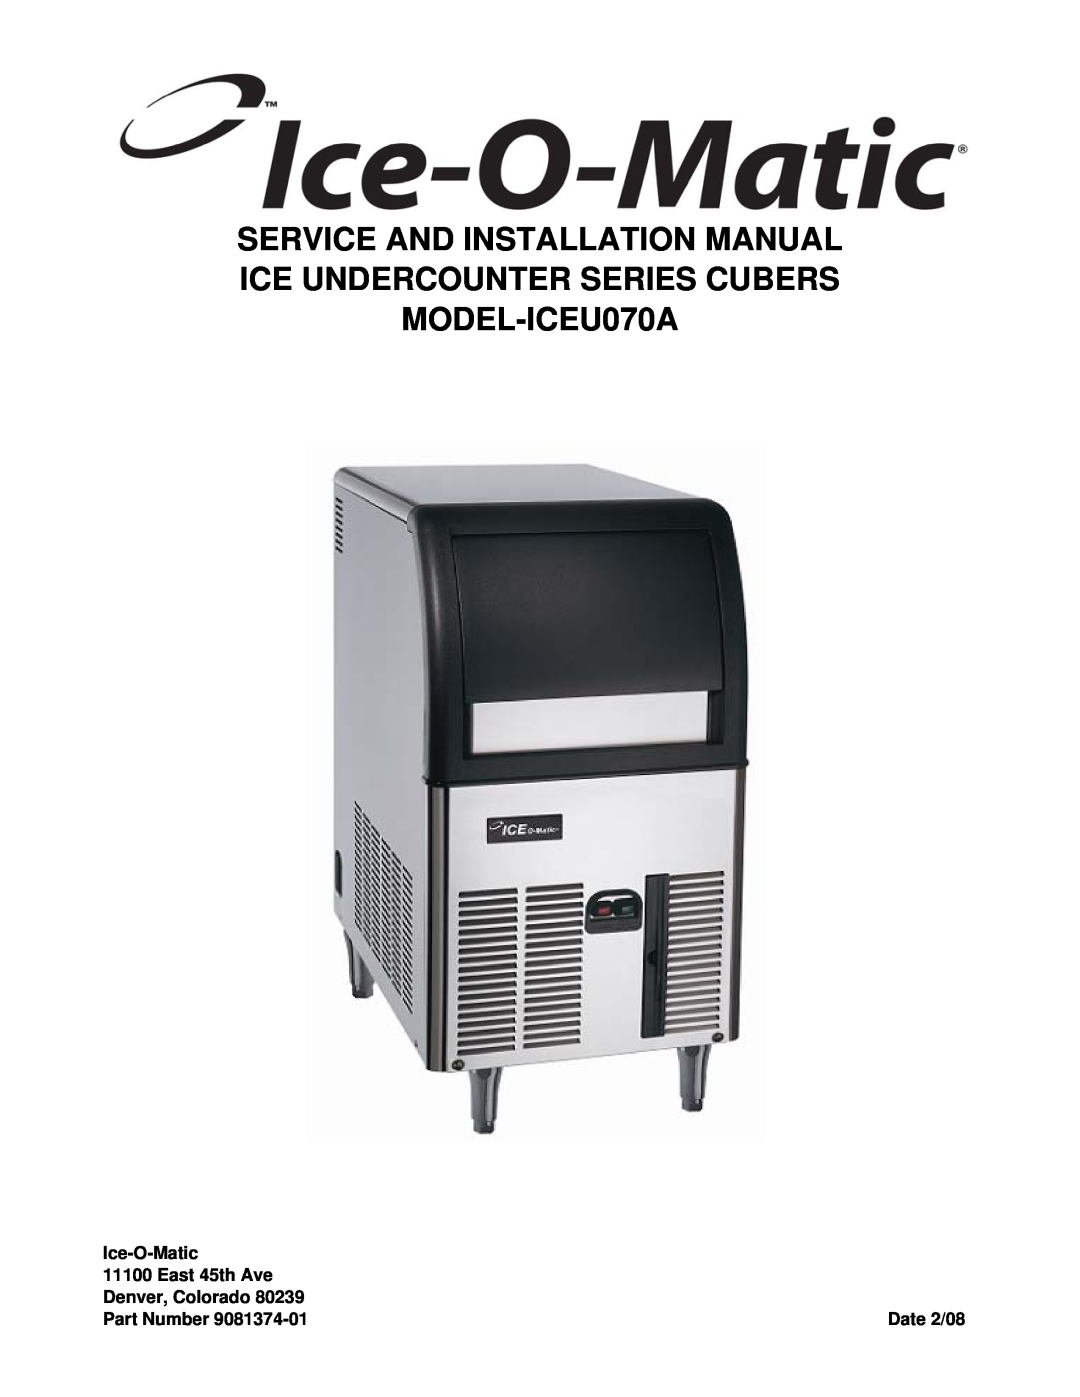 Ice-O-Matic ICEU070A installation manual Ice-O-Matic, East 45th Ave, Denver, Colorado, Part Number, Date 2/08 